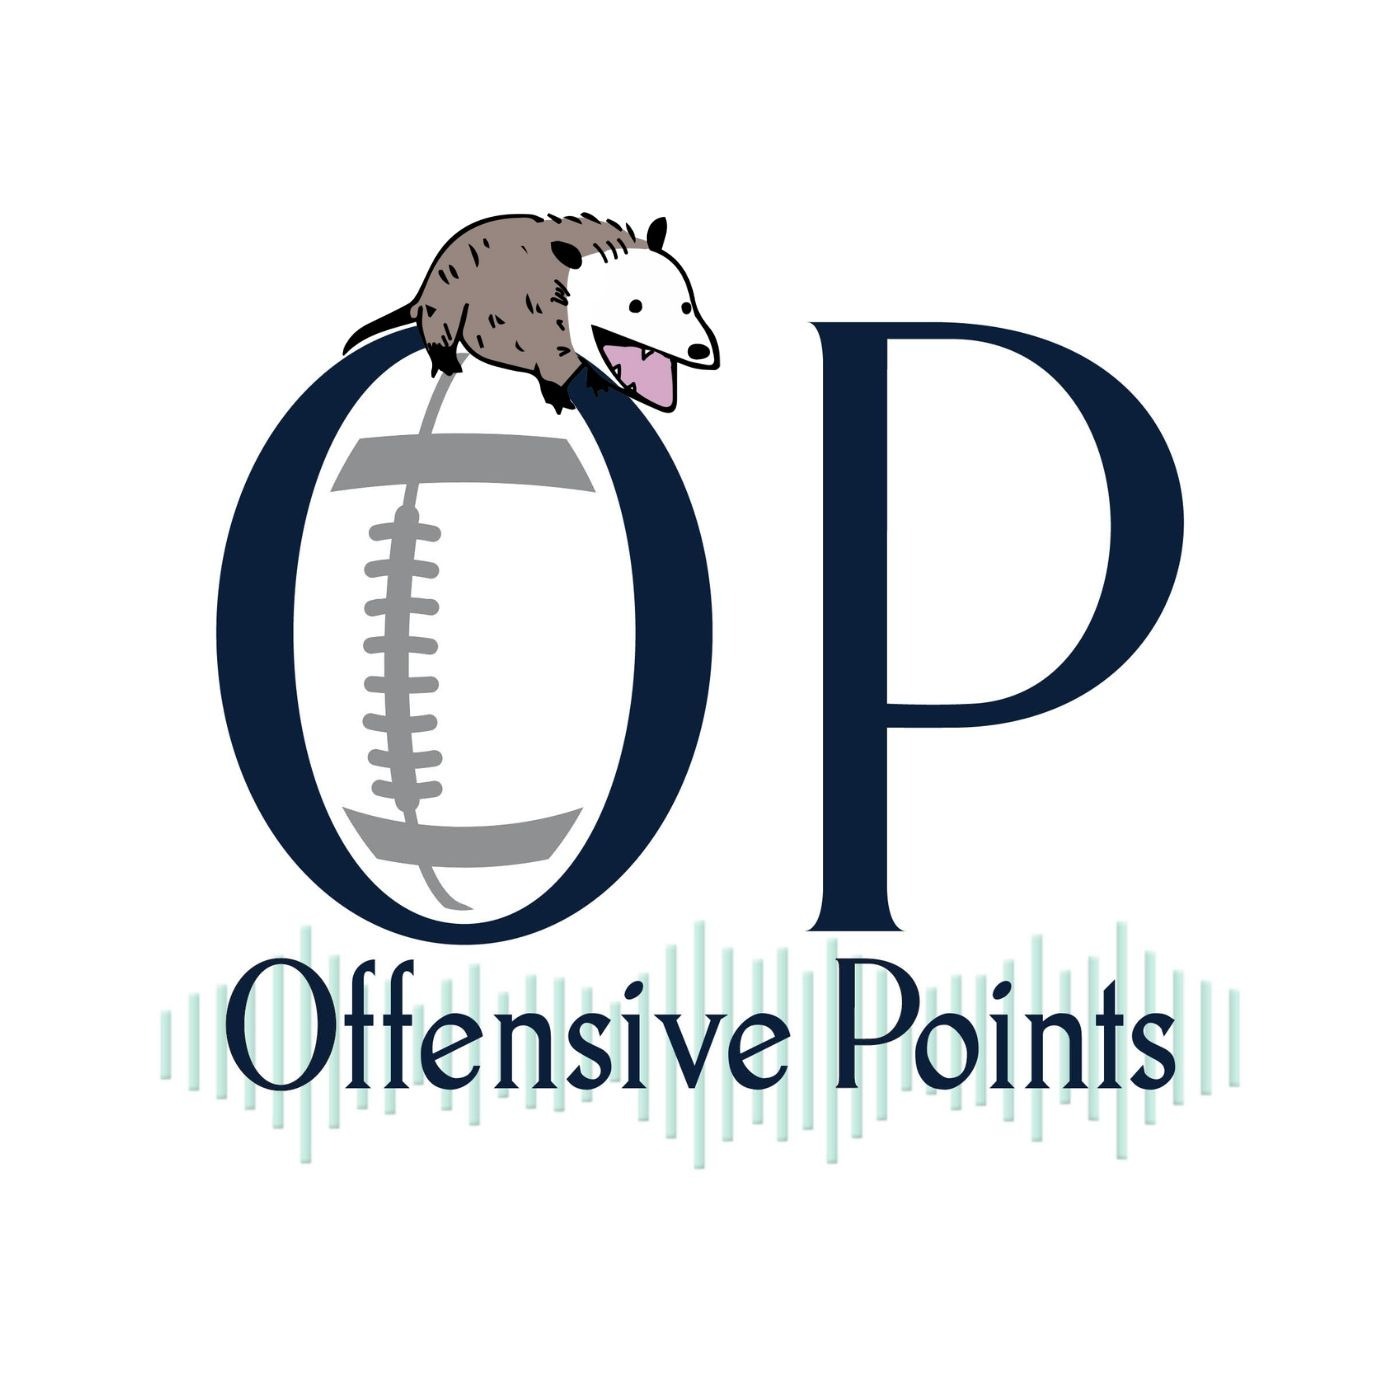 Offensive Points- NFC West Division Preview